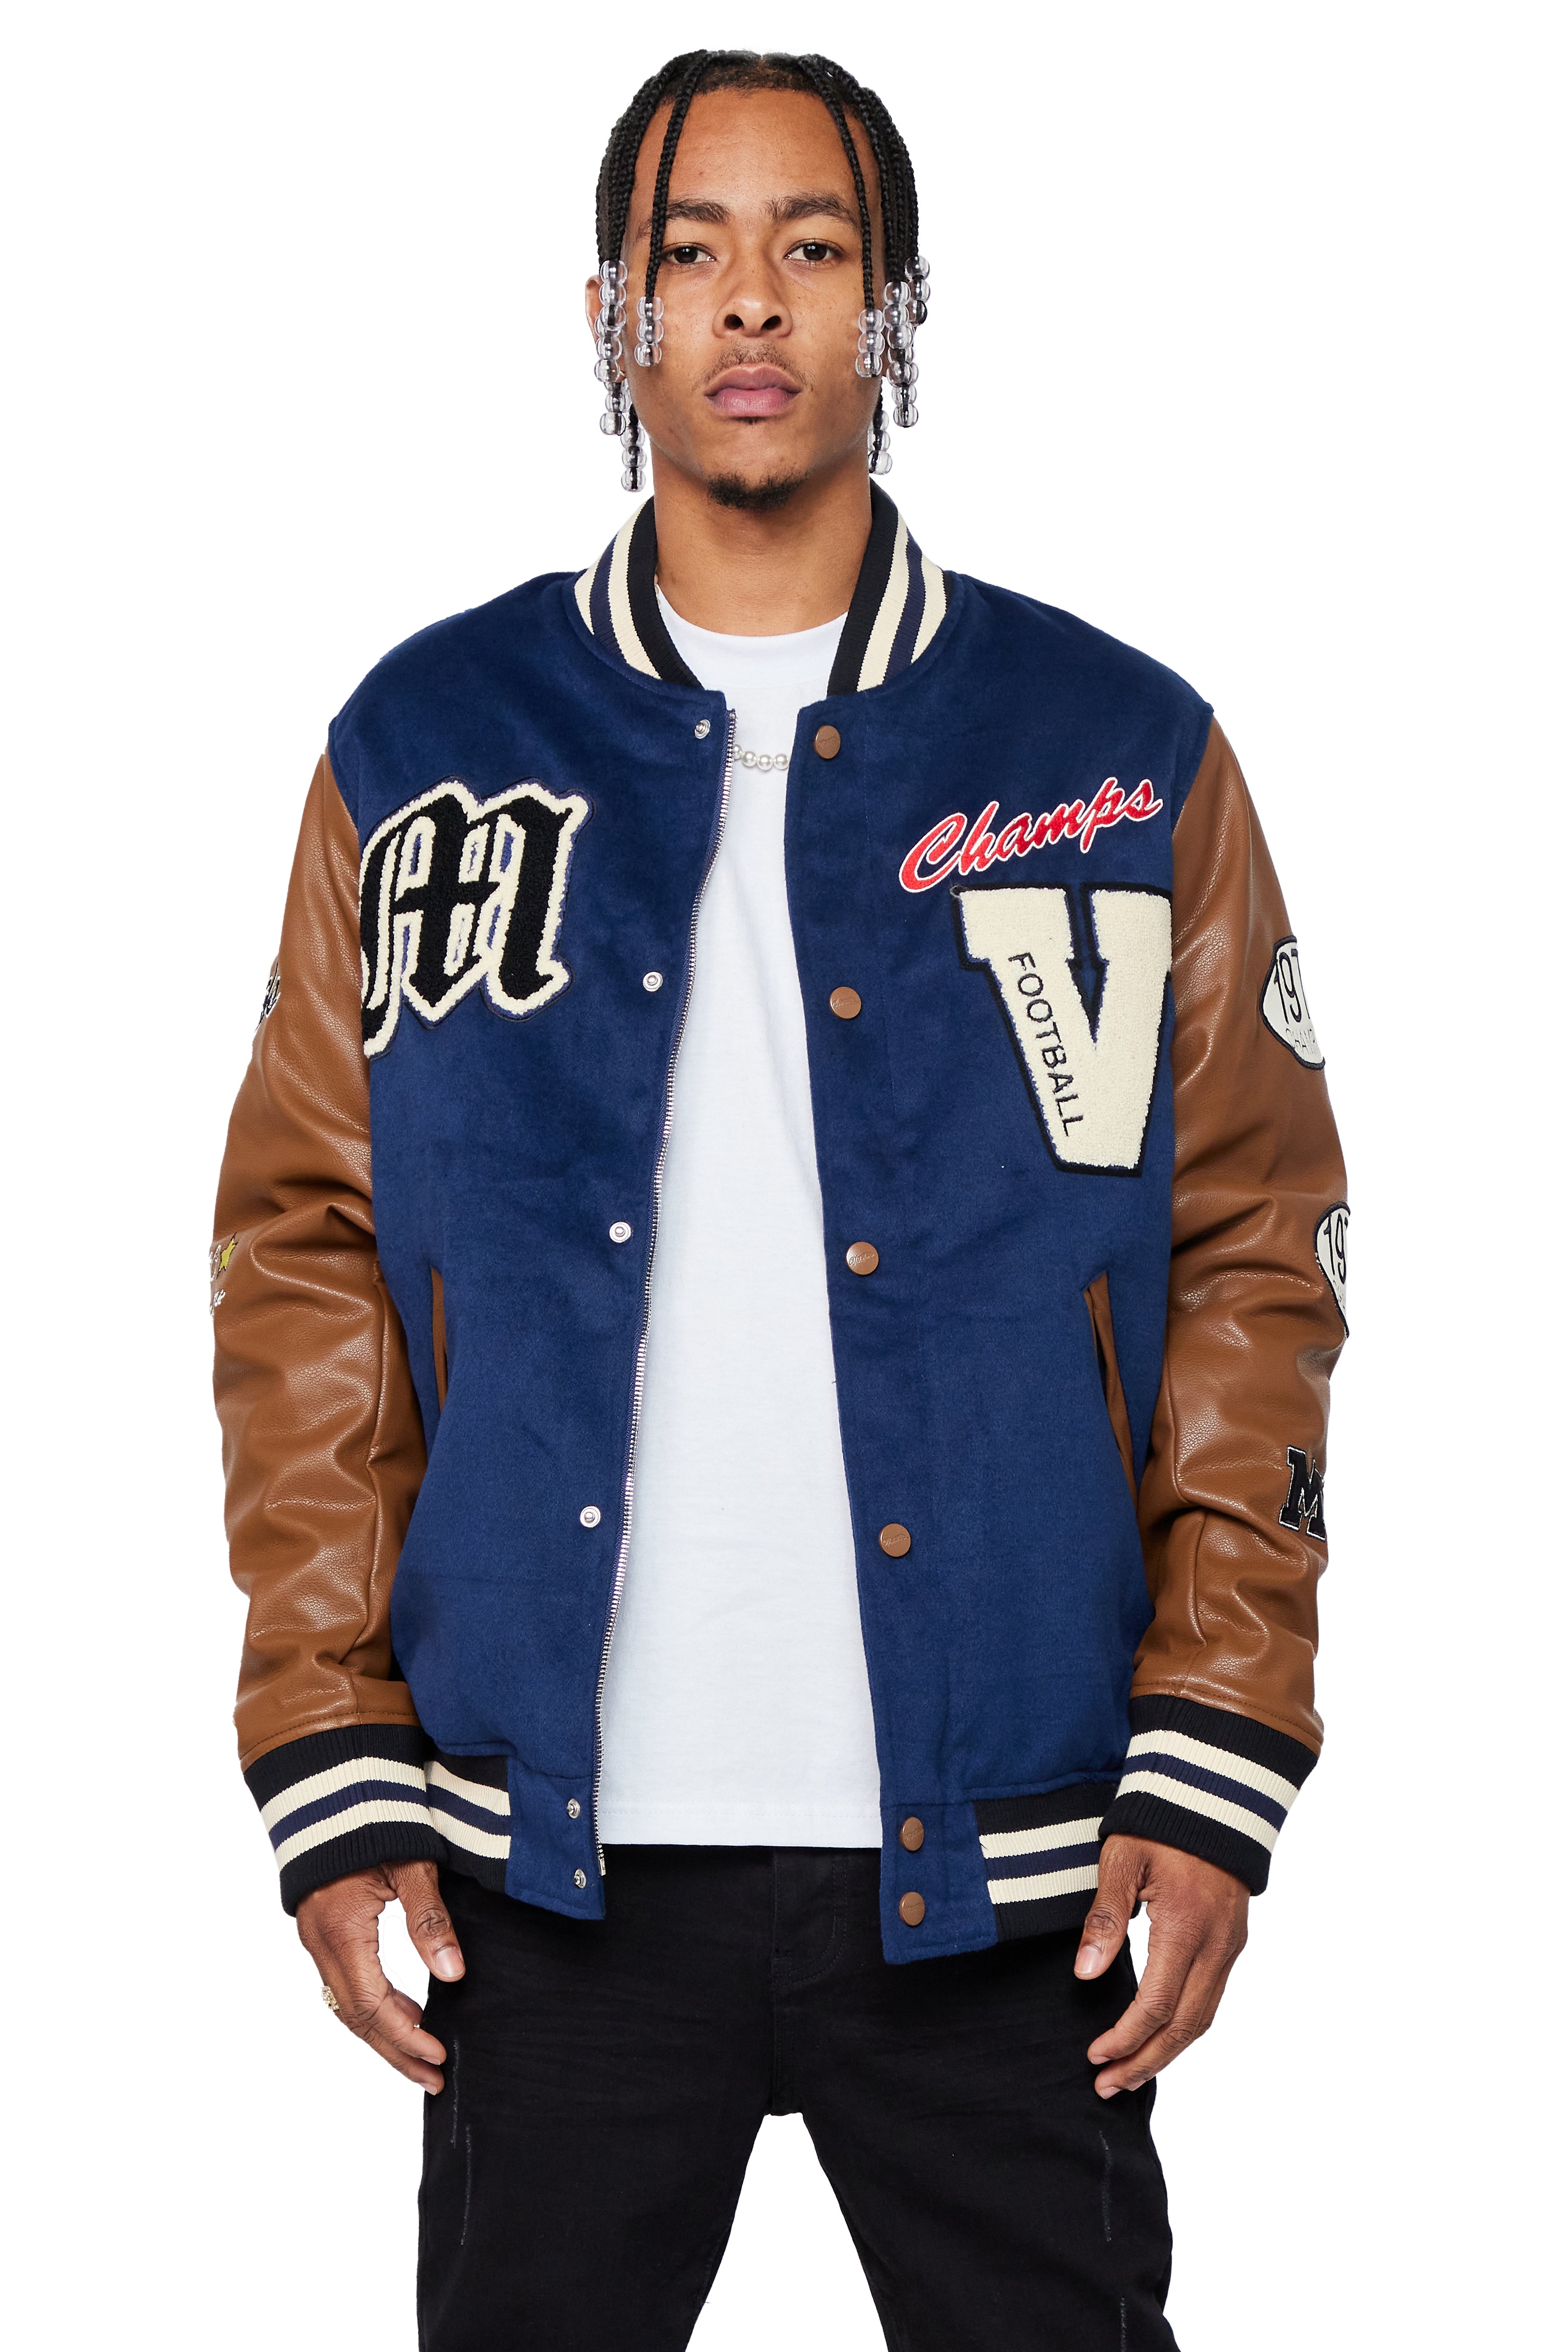 LV VARSITY JACKETS DROPPED DELIVERY ALL OVER NEPAL DM US ON INSTA